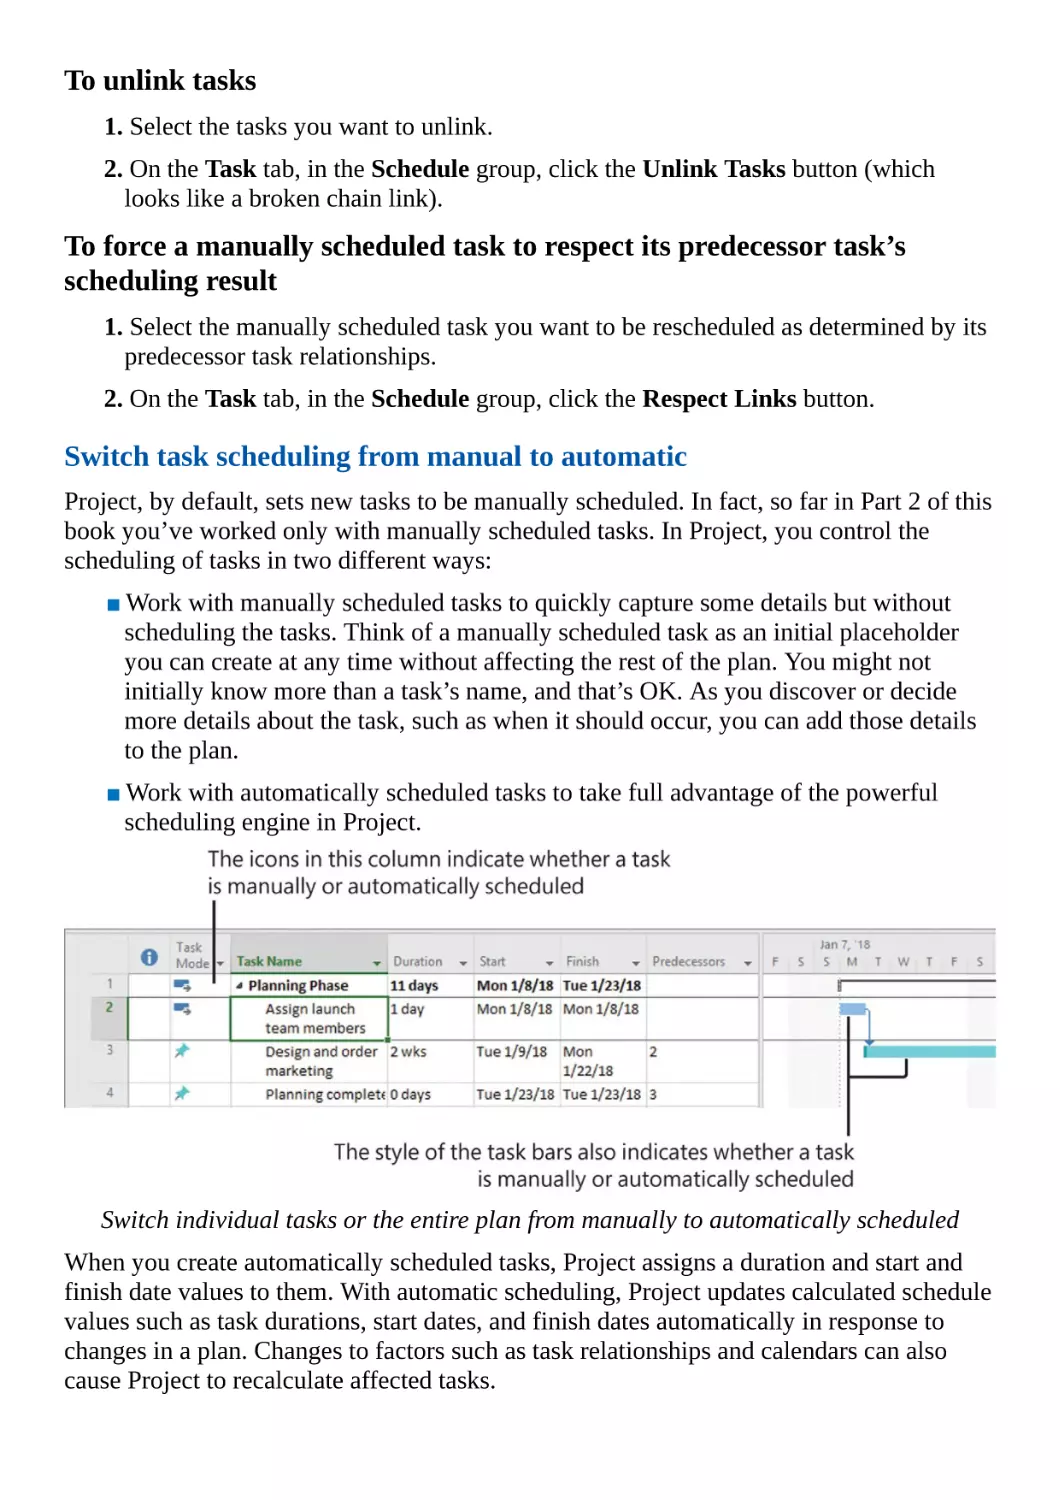 Switch task scheduling from manual to automatic